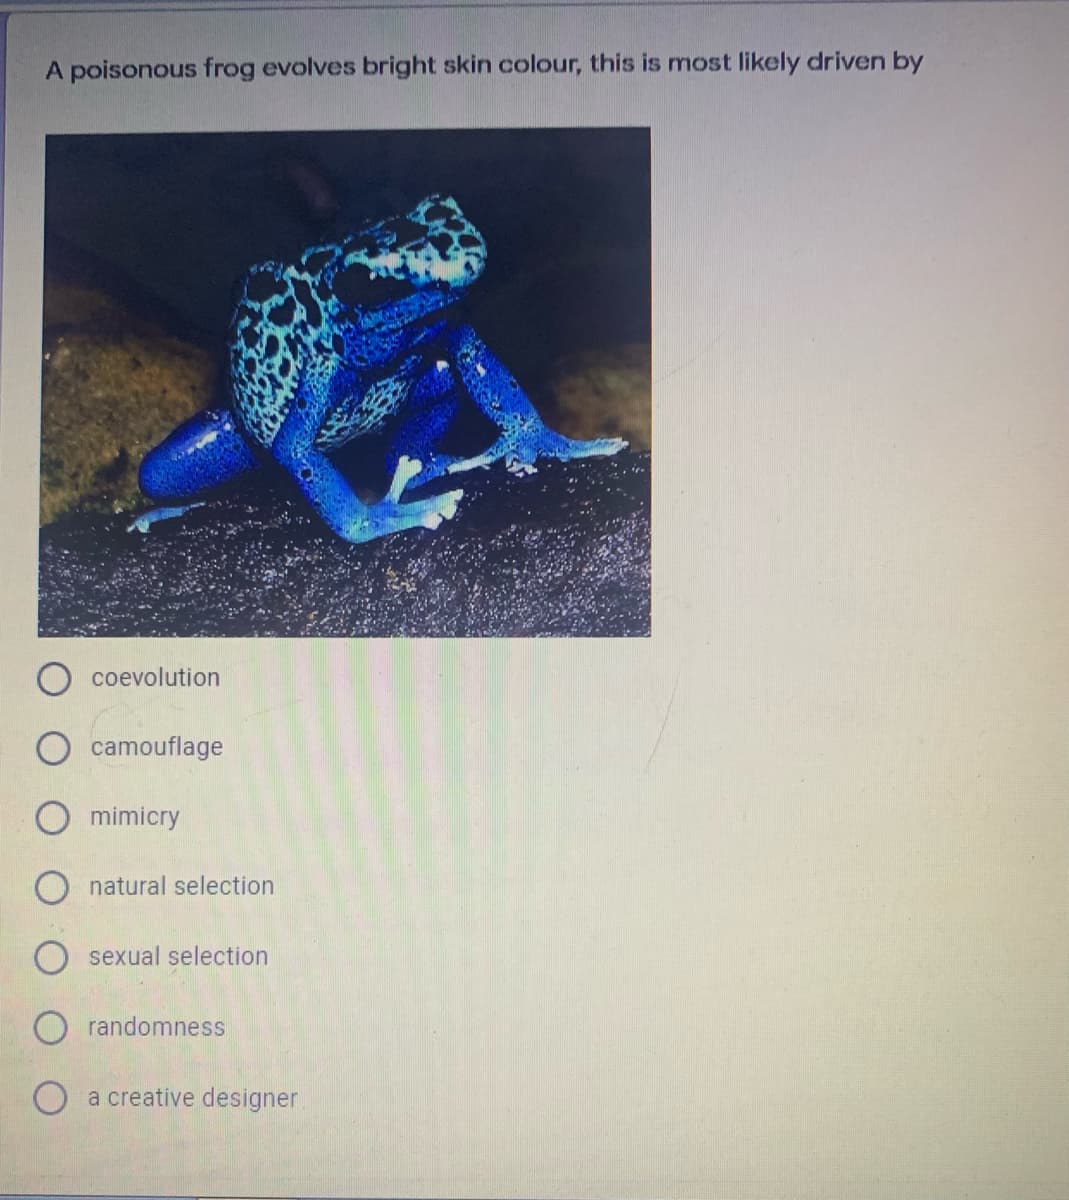 A poisonous frog evolves bright skin colour, this is most likely driven by
coevolution
camouflage
O mimicry
natural selection
sexual selection
O randomness
a creative designer.
